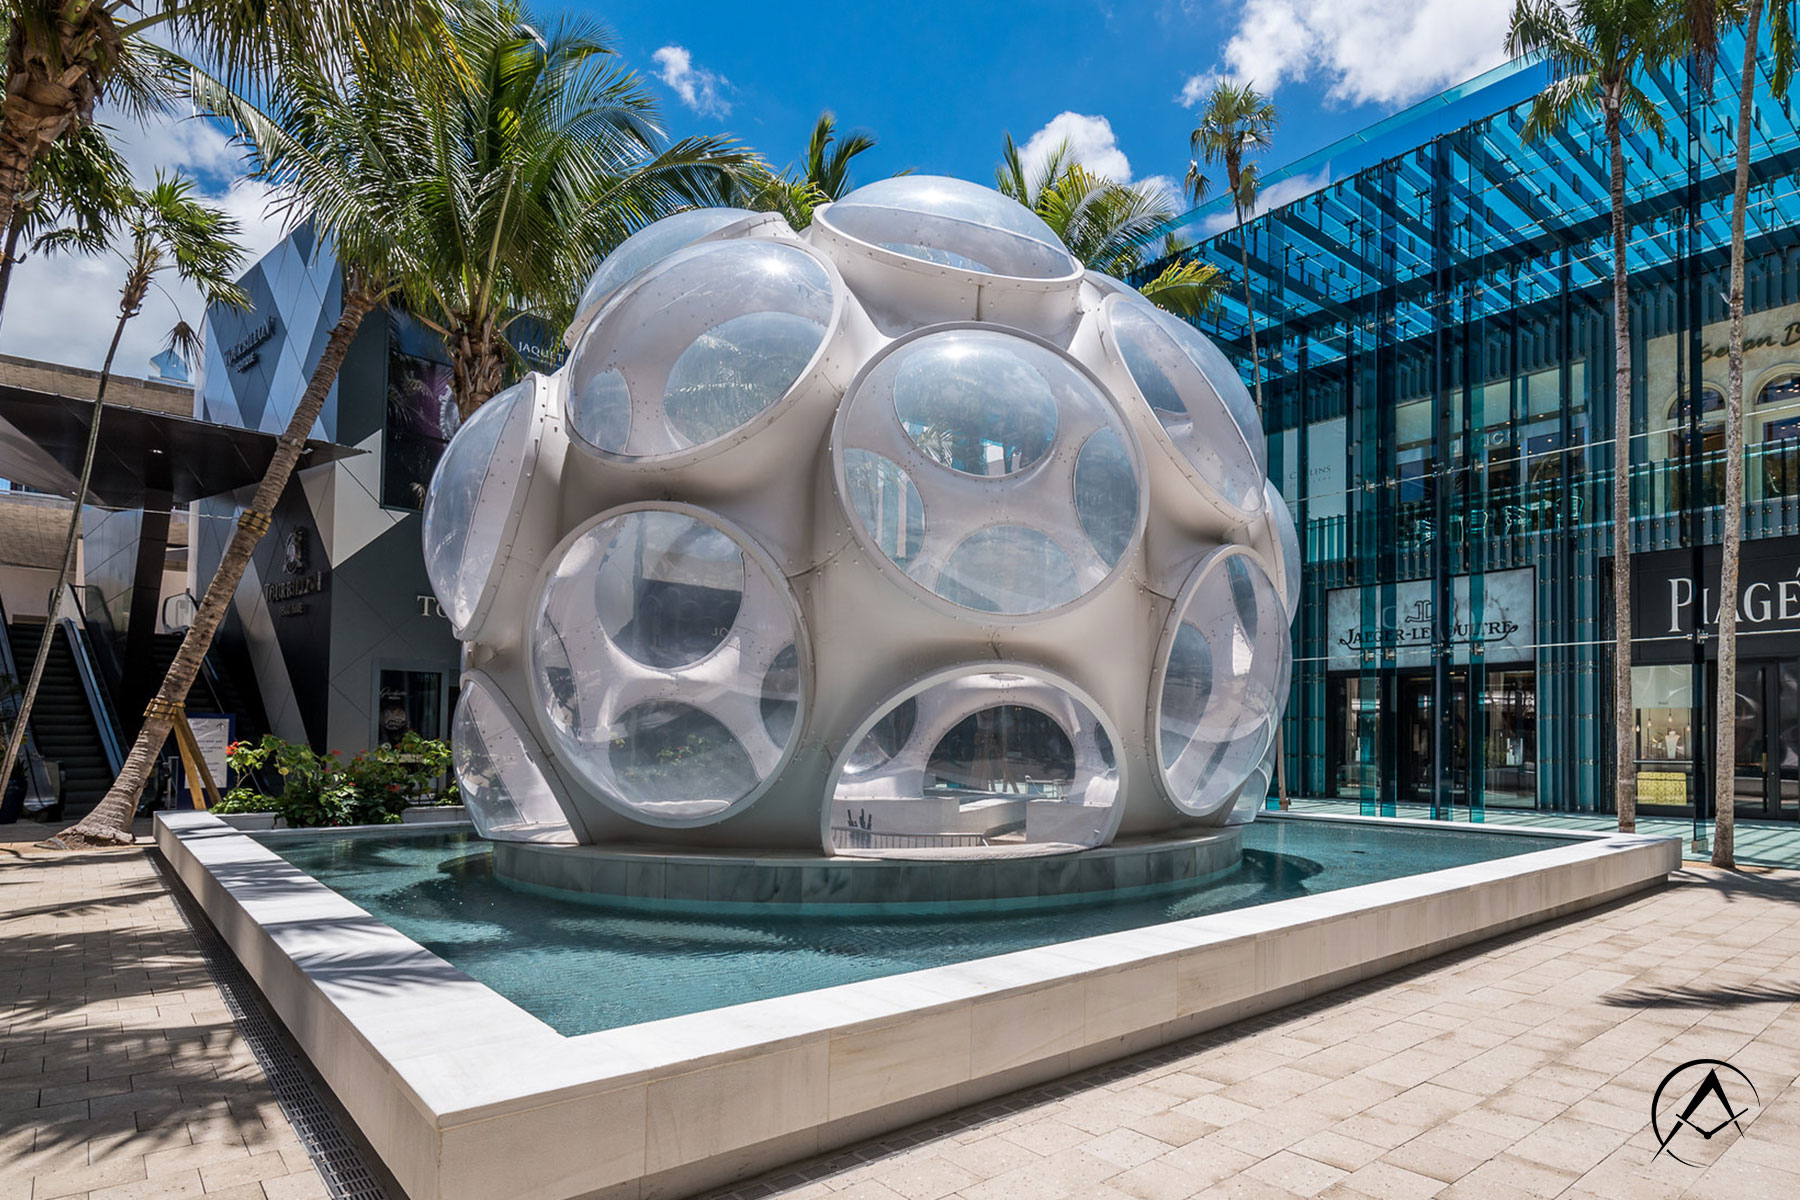 Miami Design District’s Fly’s Eye Dome Surrounded by Palm Trees and Store Fronts